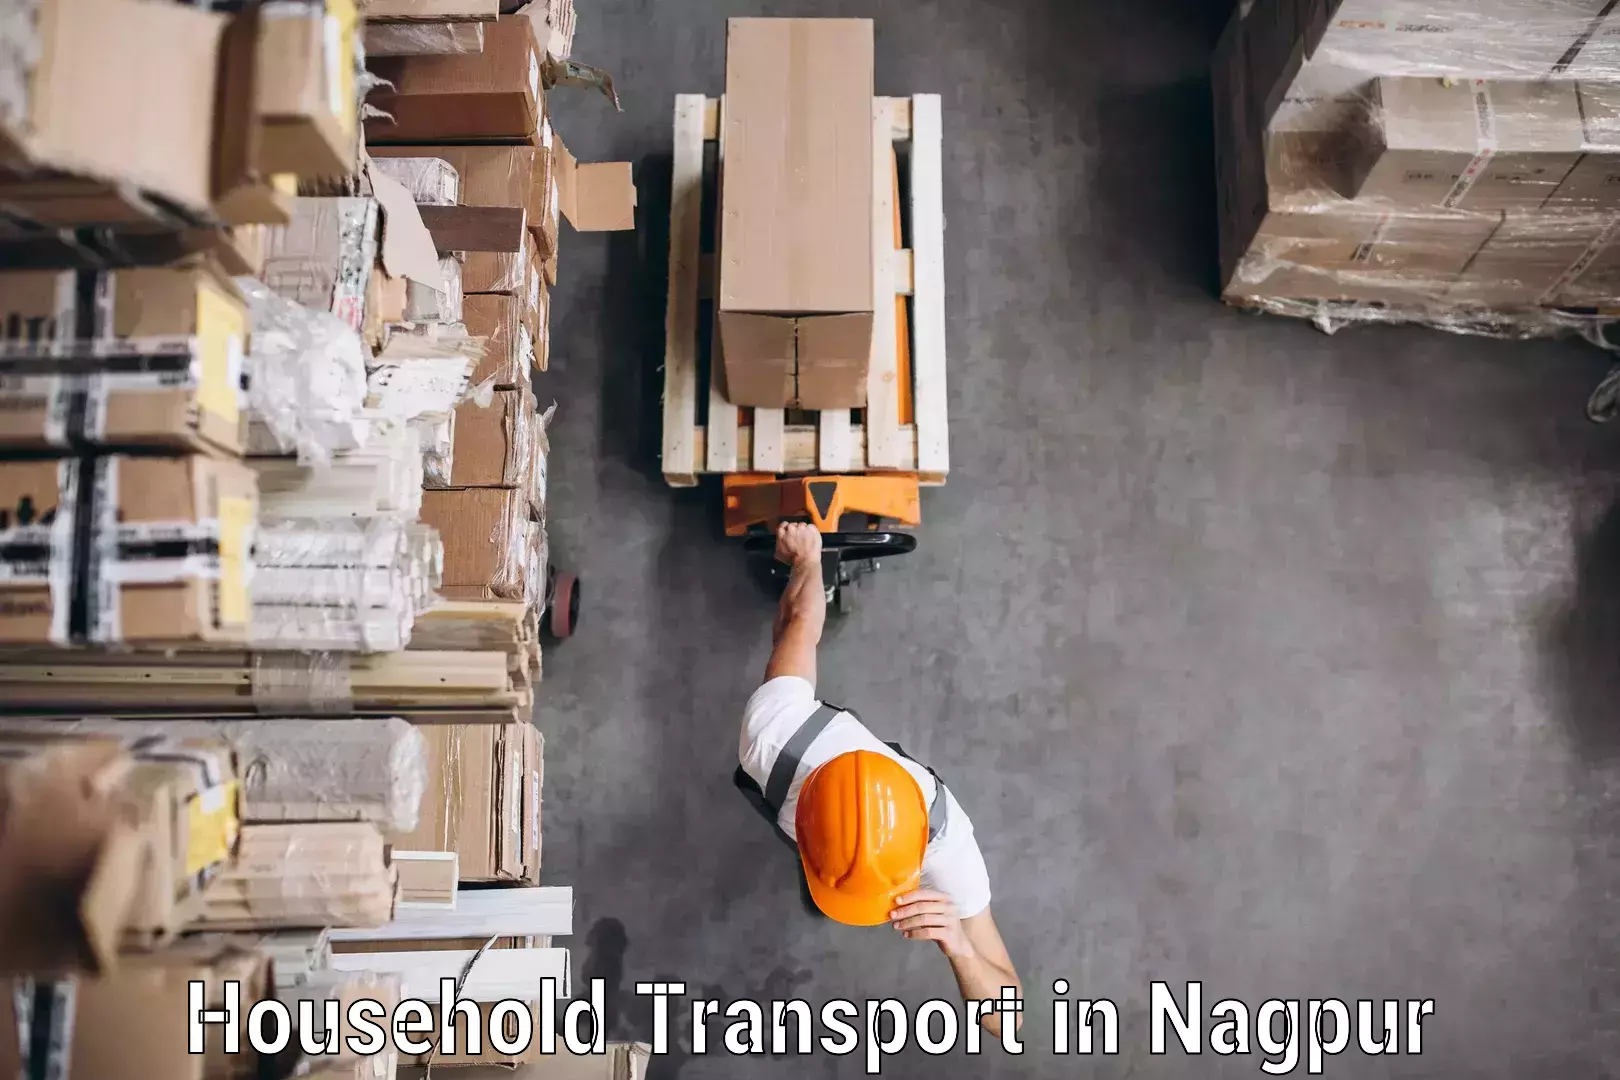 Furniture transport specialists in Nagpur